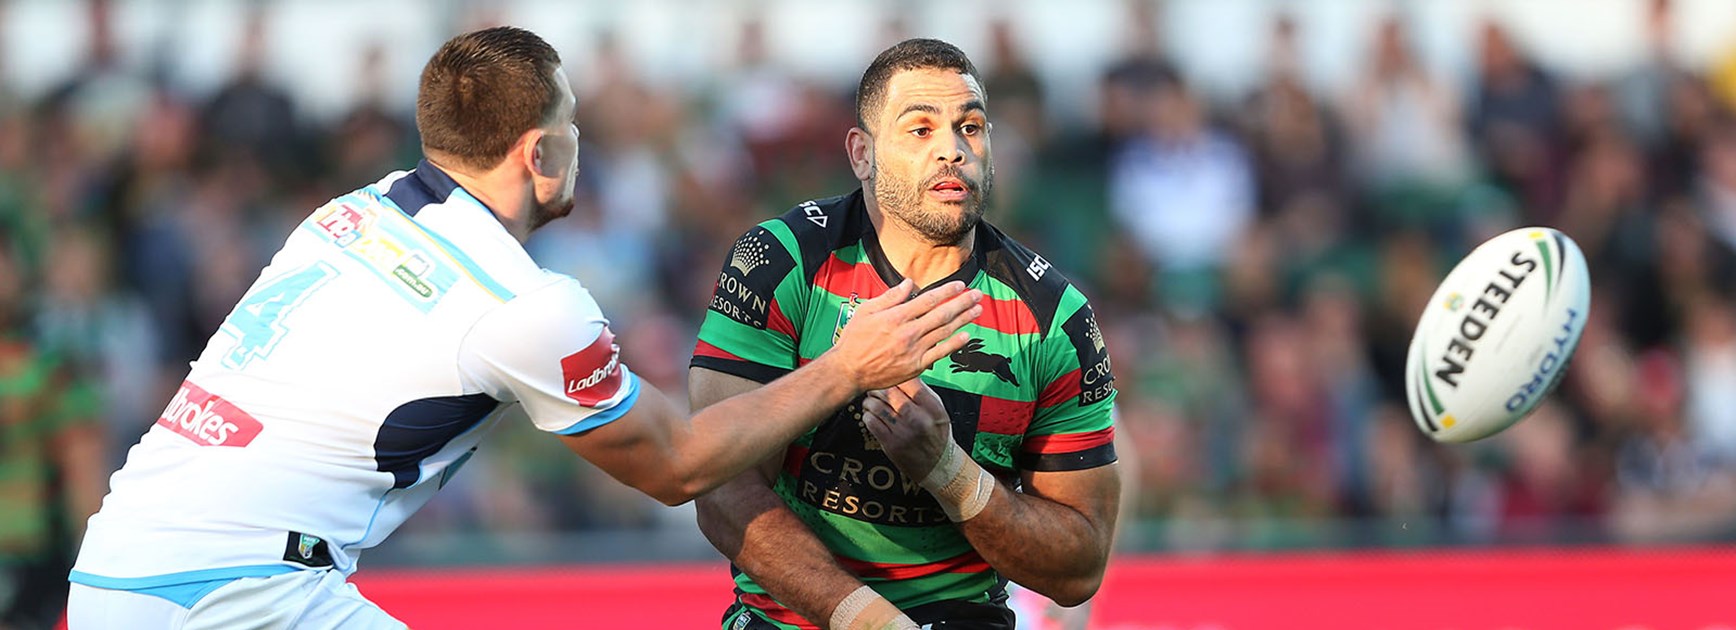 Greg Inglis takes on the Titans line in Perth.